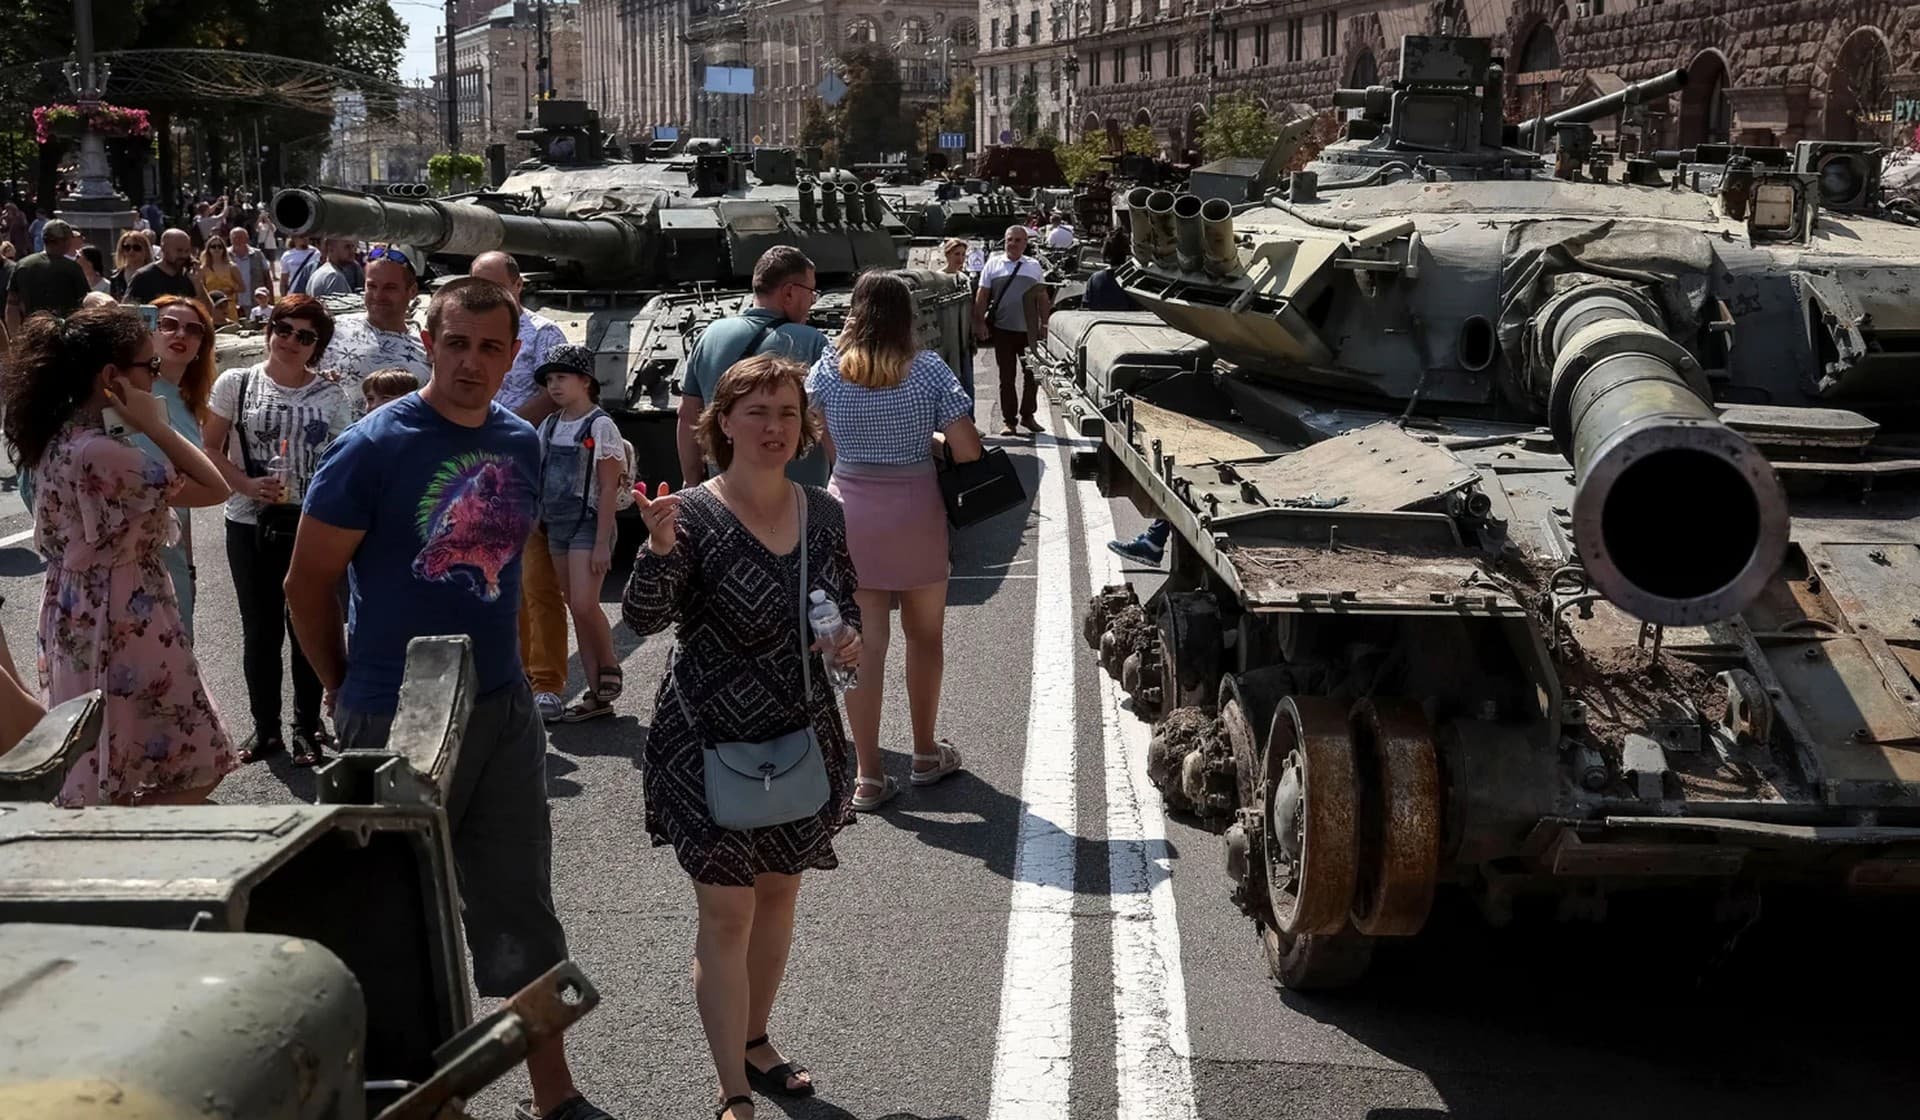 People attend an exhibition displaying destroyed Russian military vehicles in Kyiv